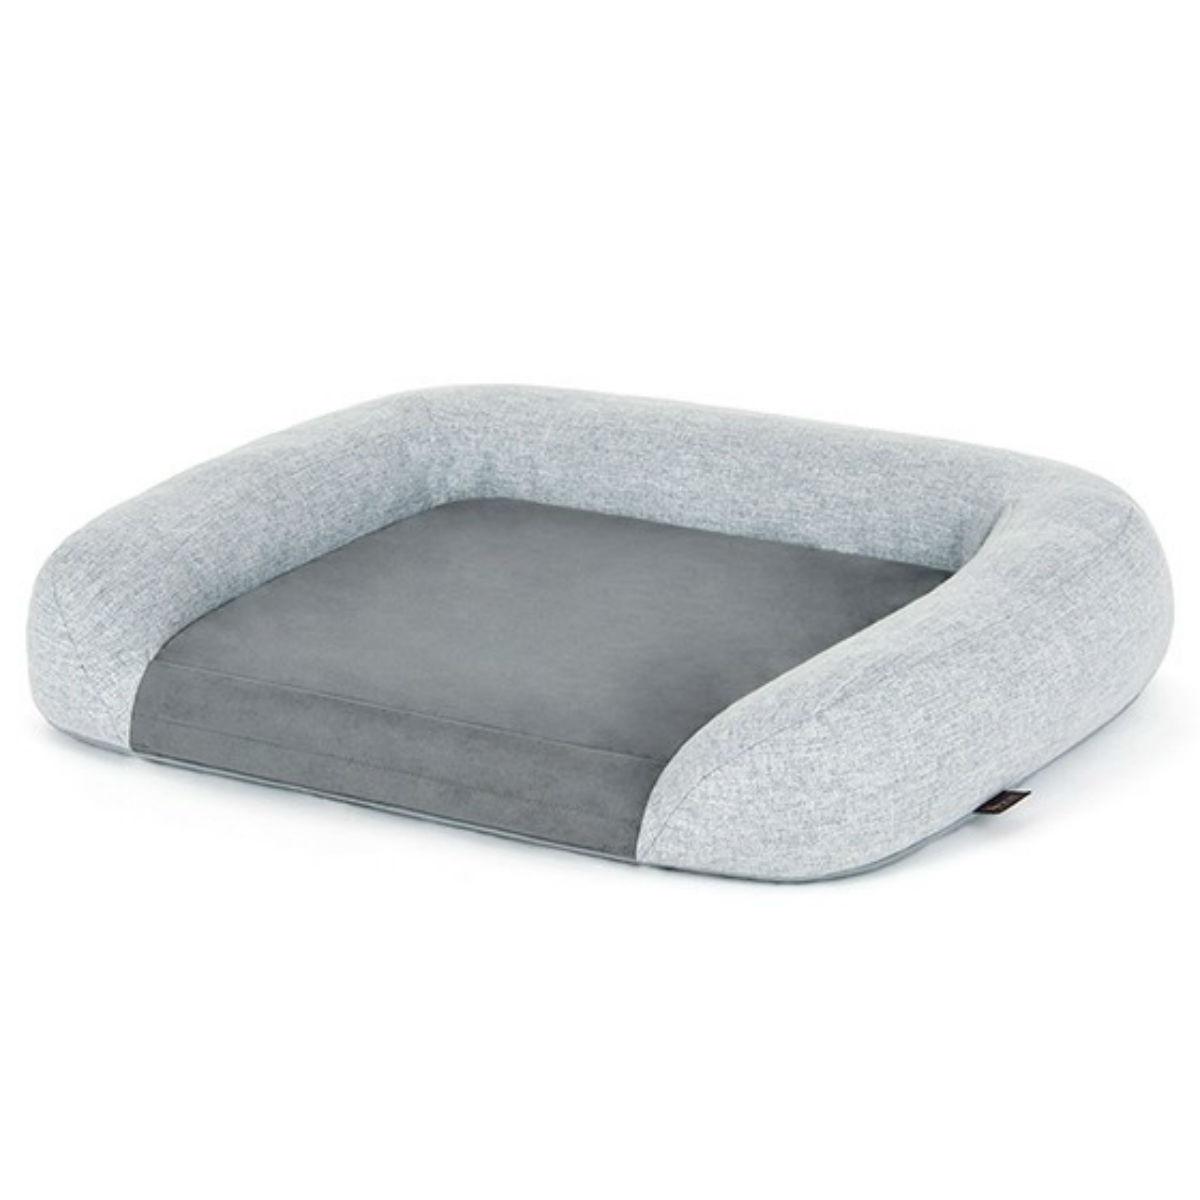 P.L.A.Y. California Dreaming Memory Foam Lounger Dog Bed - Gray